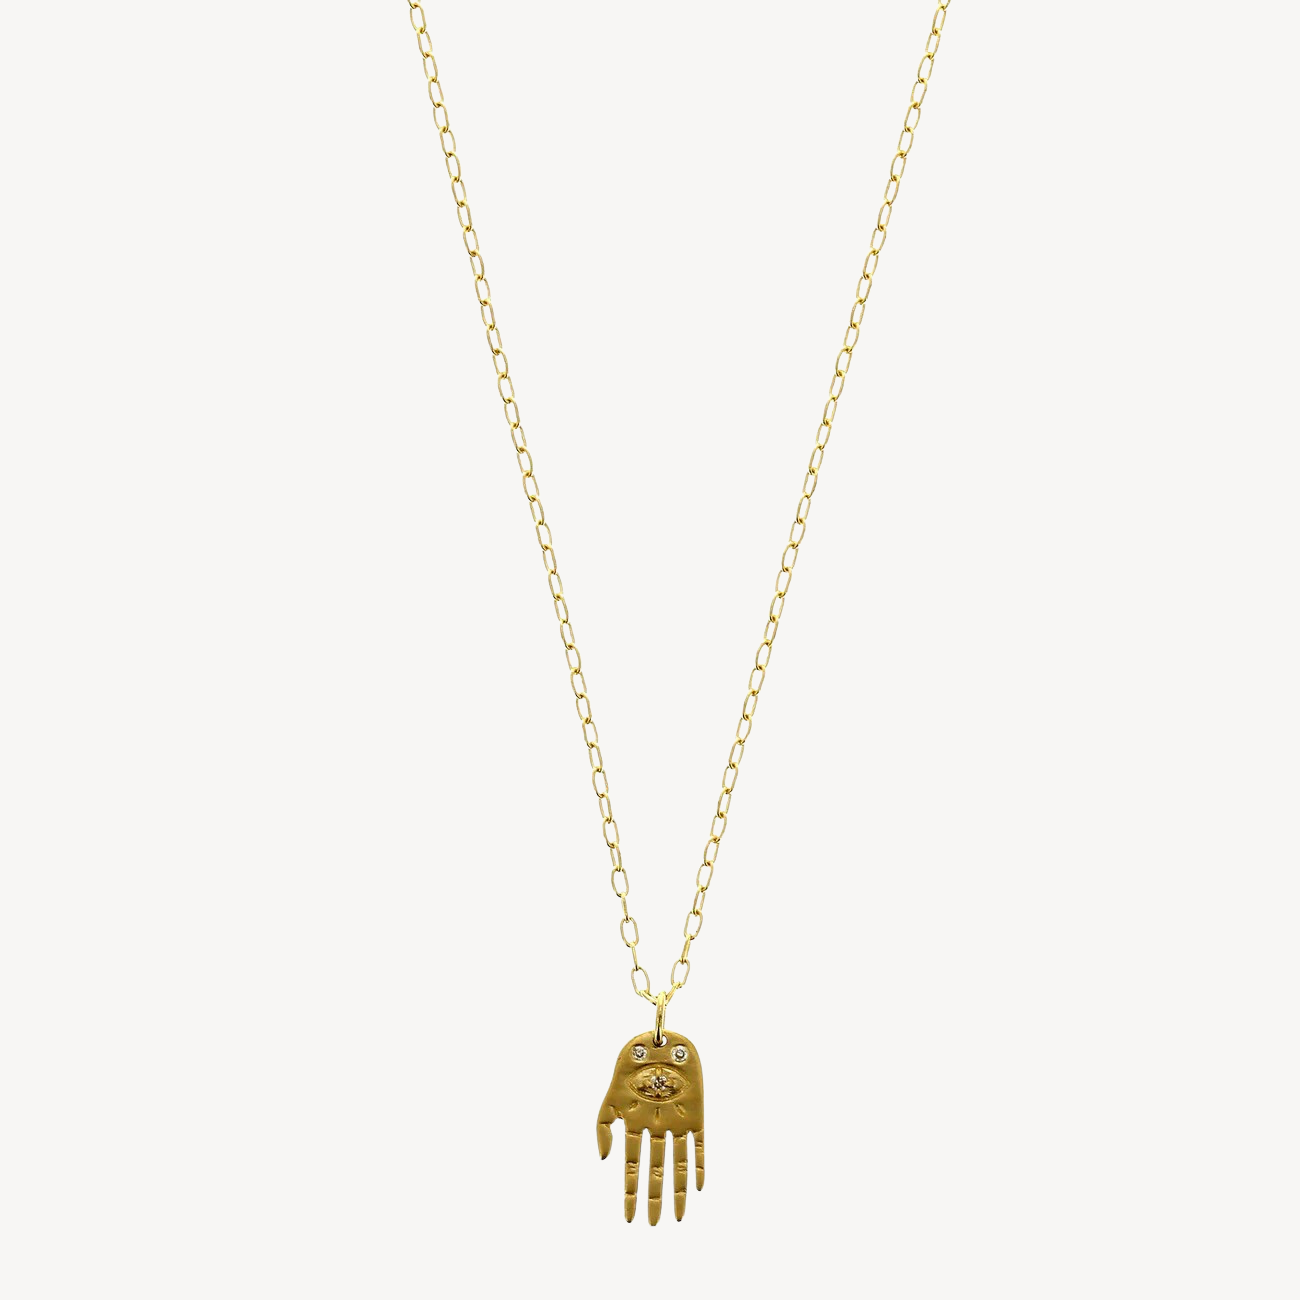 Small Dharma Hand Necklace